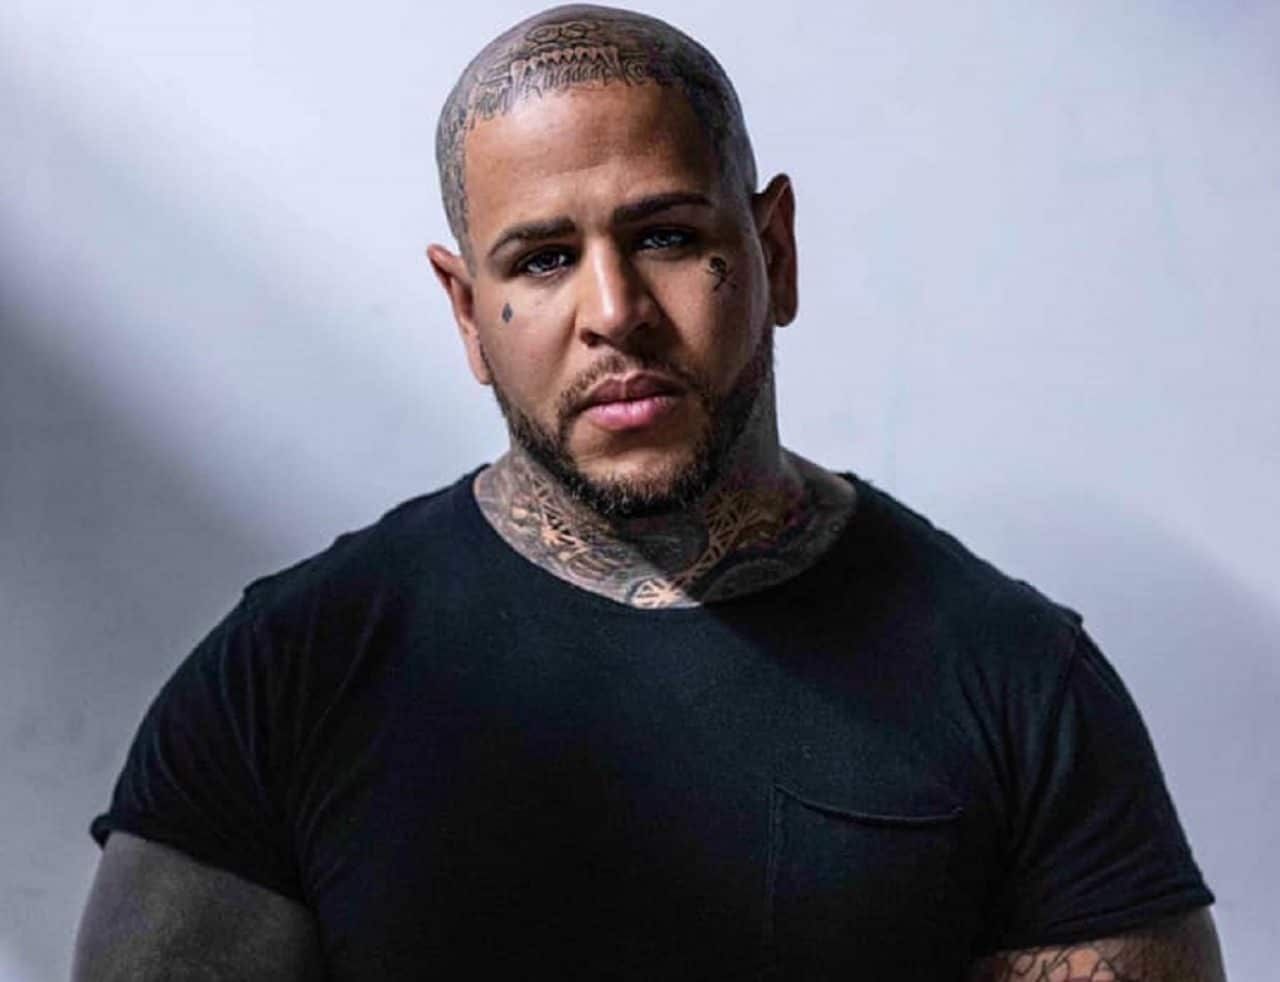 Ex-BAD WOLVES Frontman TOMMY VEXT Now Touring As ‘TOMMY VEXT AND THE B@D W8LV3S’